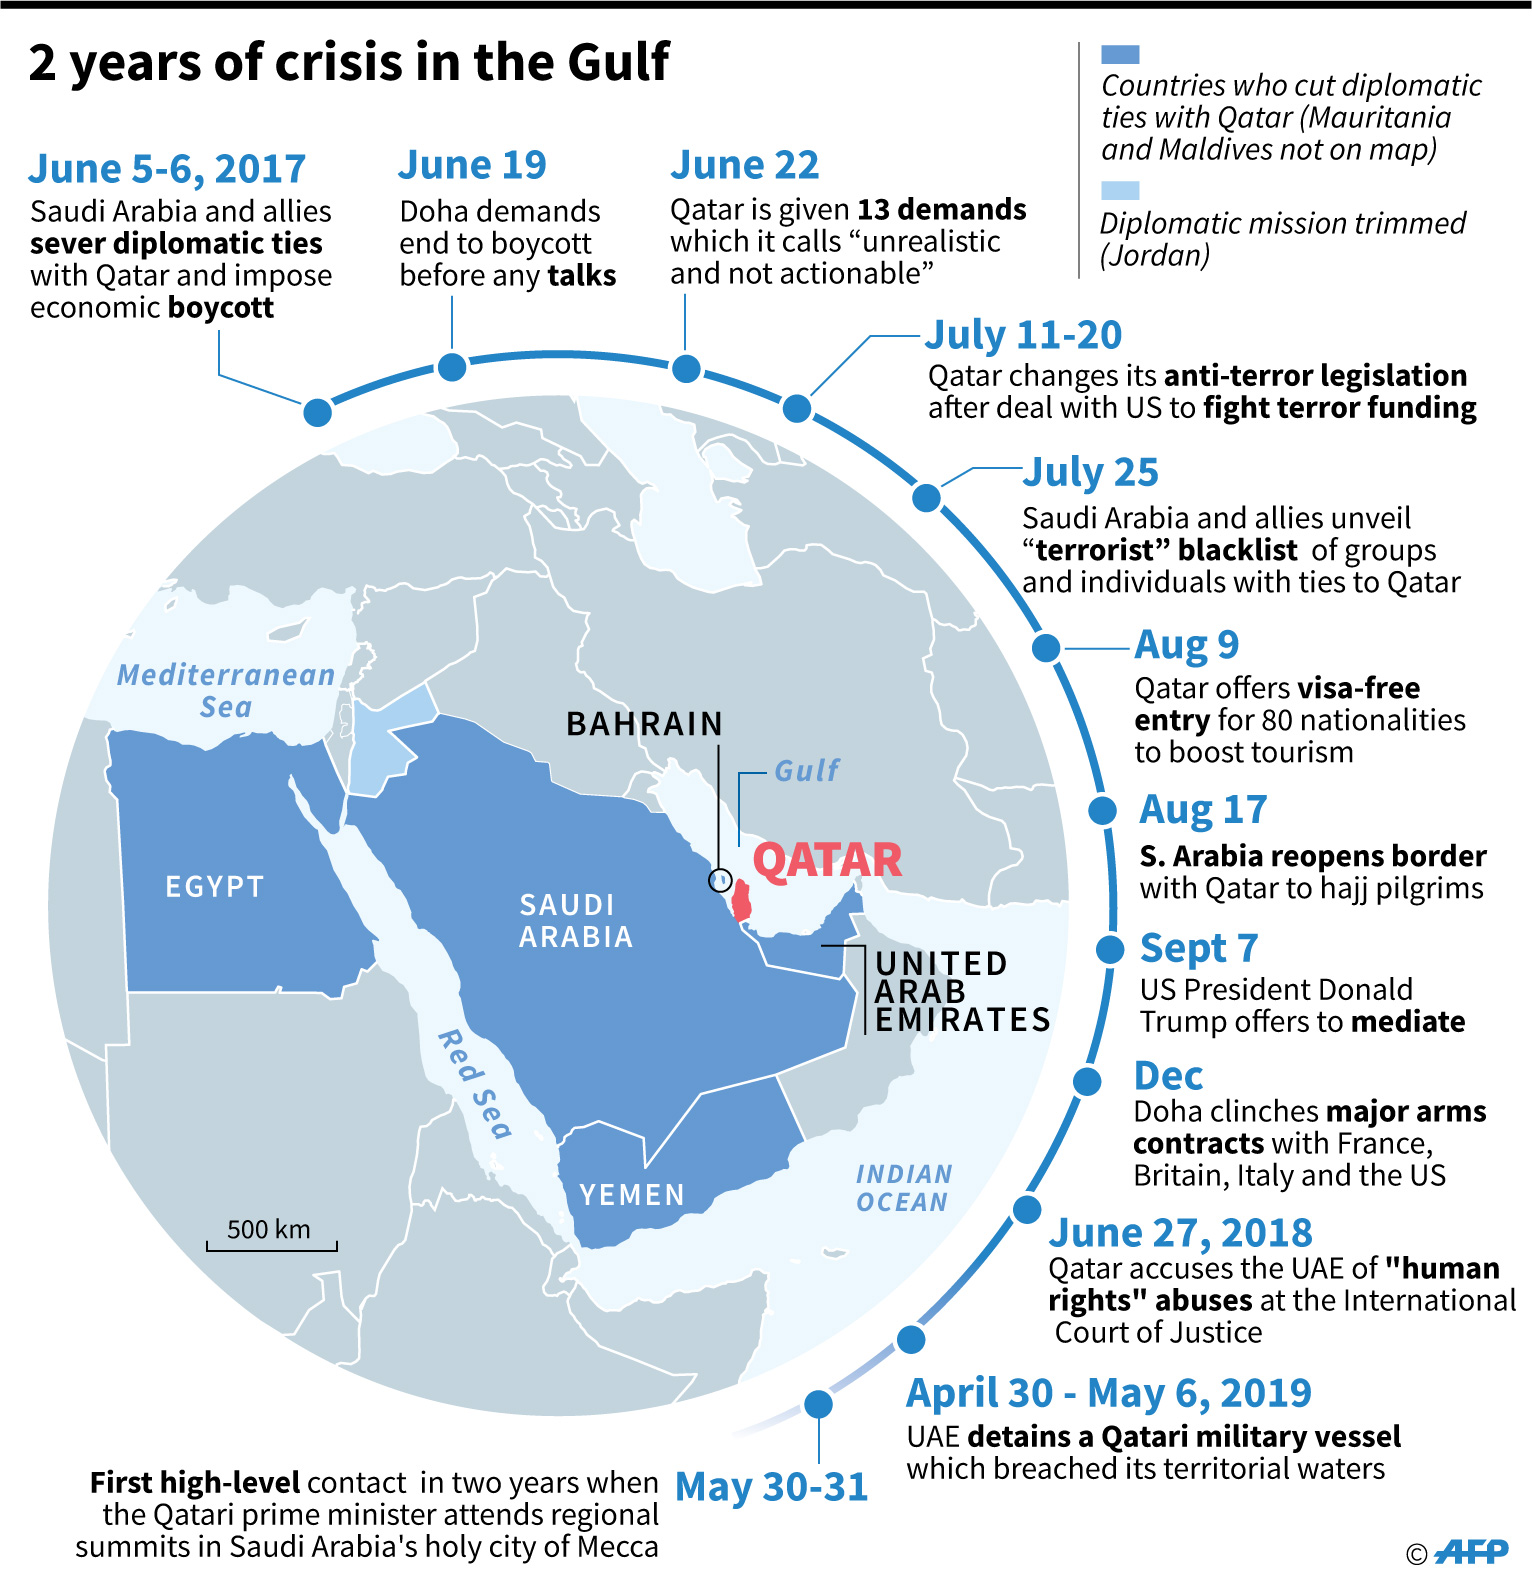 A timeline of developments in the diplomatic crisis opposing Qatar with Saudi Arabia and its allies for the past two years.